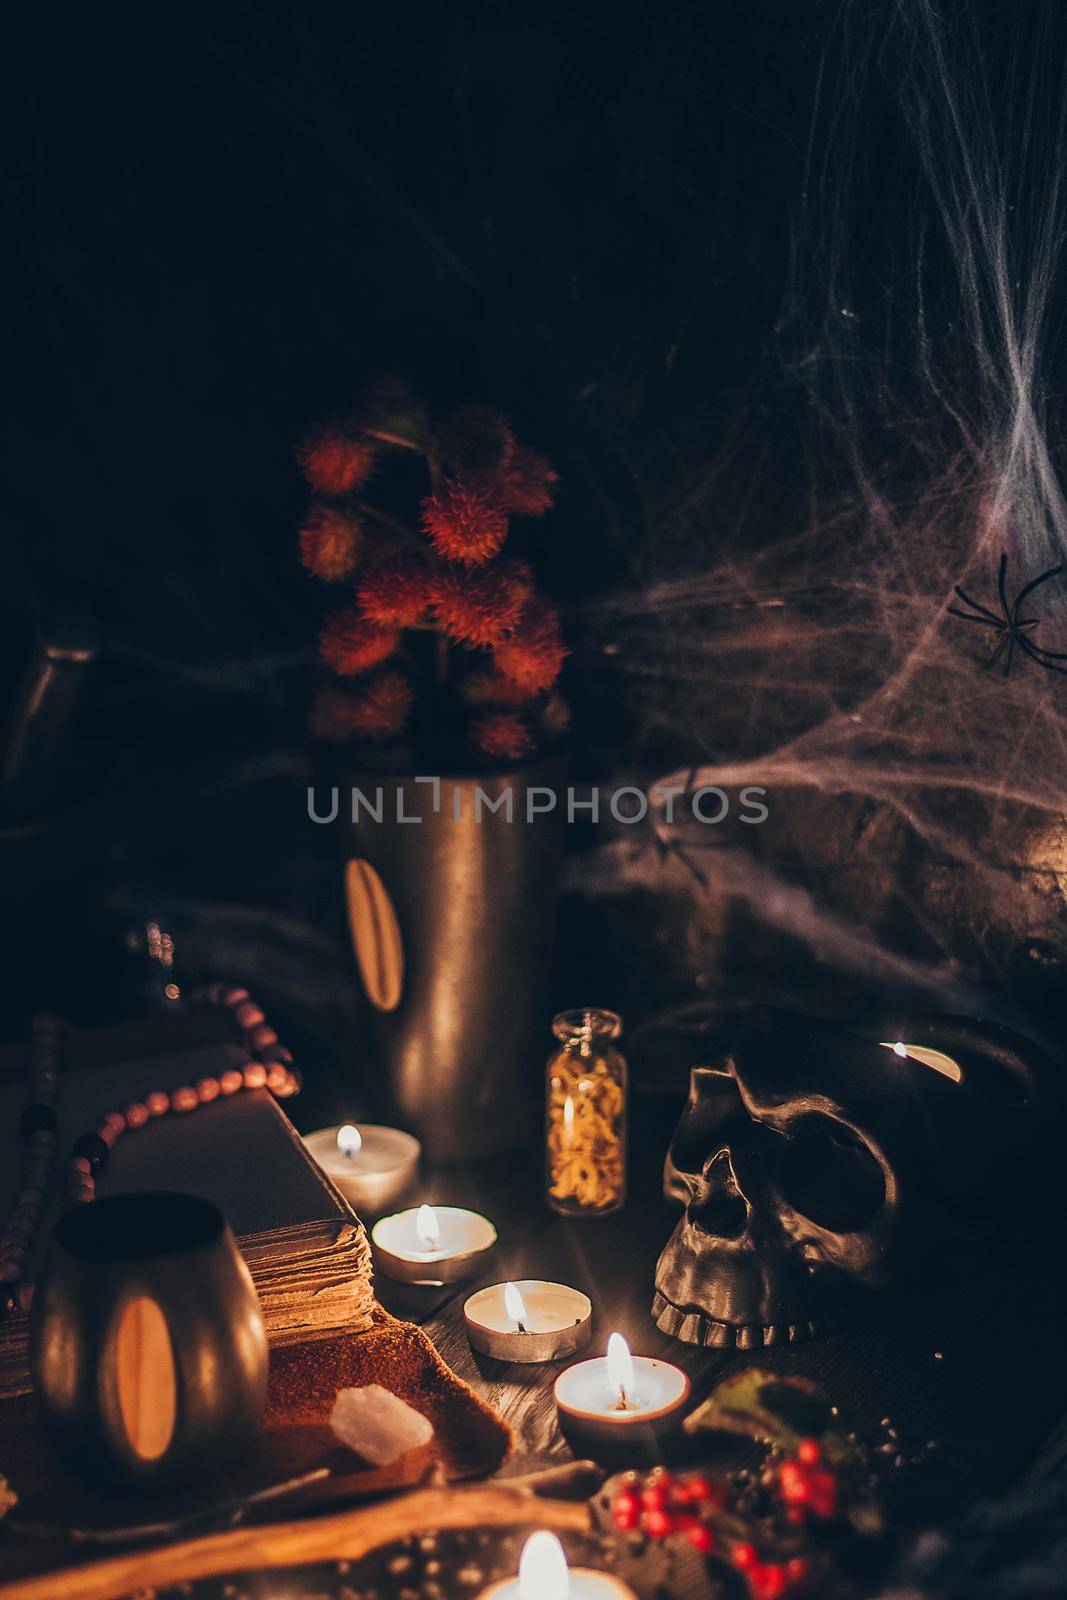 A ritual halloween witchcraft scene with candles, herbs, spider web, vintage bottles on the rustic background with a scary skull face and antique book.